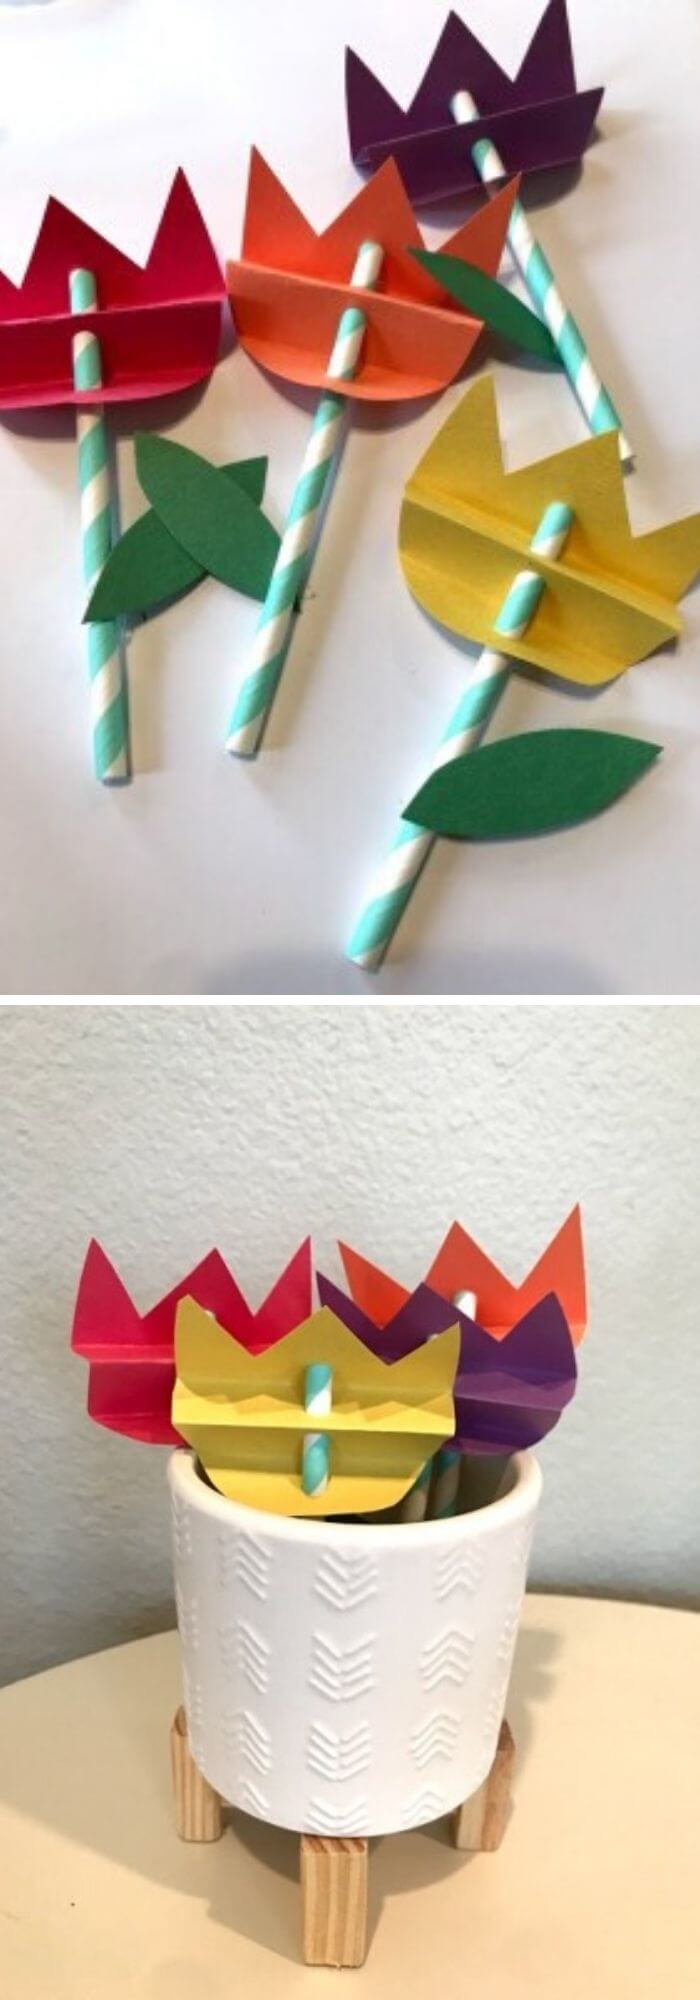 17 cool crafts for kids that adults will want to try